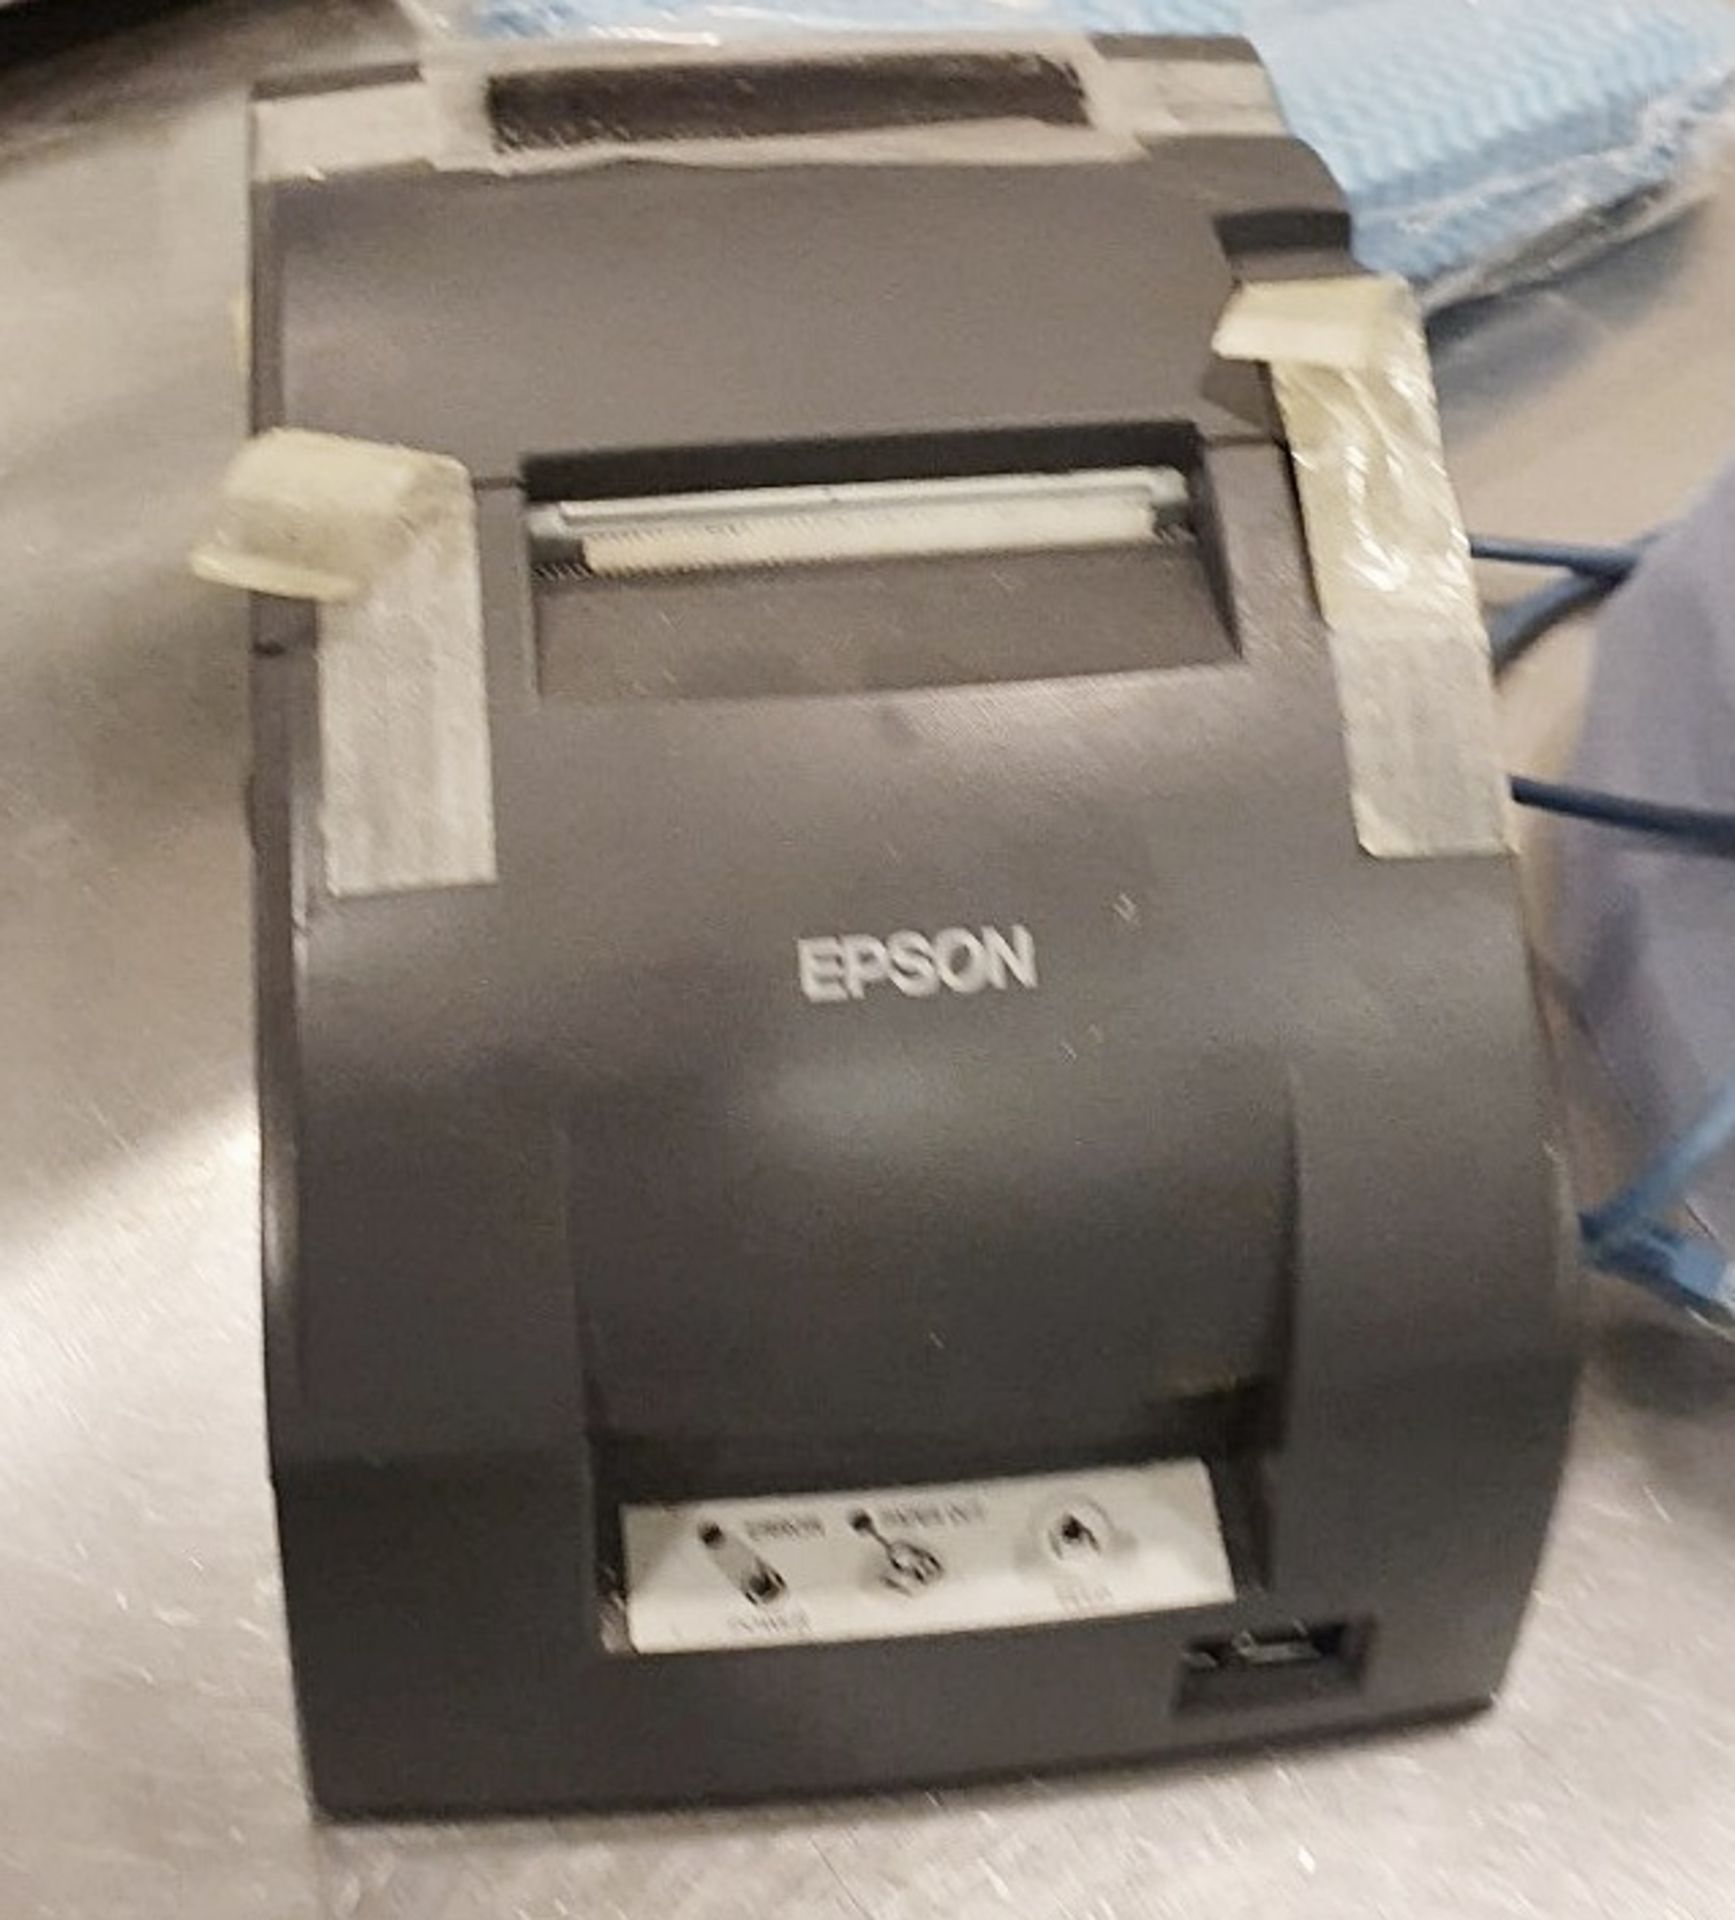 2 x Receipt Printers - Epson and Oxhoo - With Power Adaptors - Ref PA - CL463 - Location: Newbury